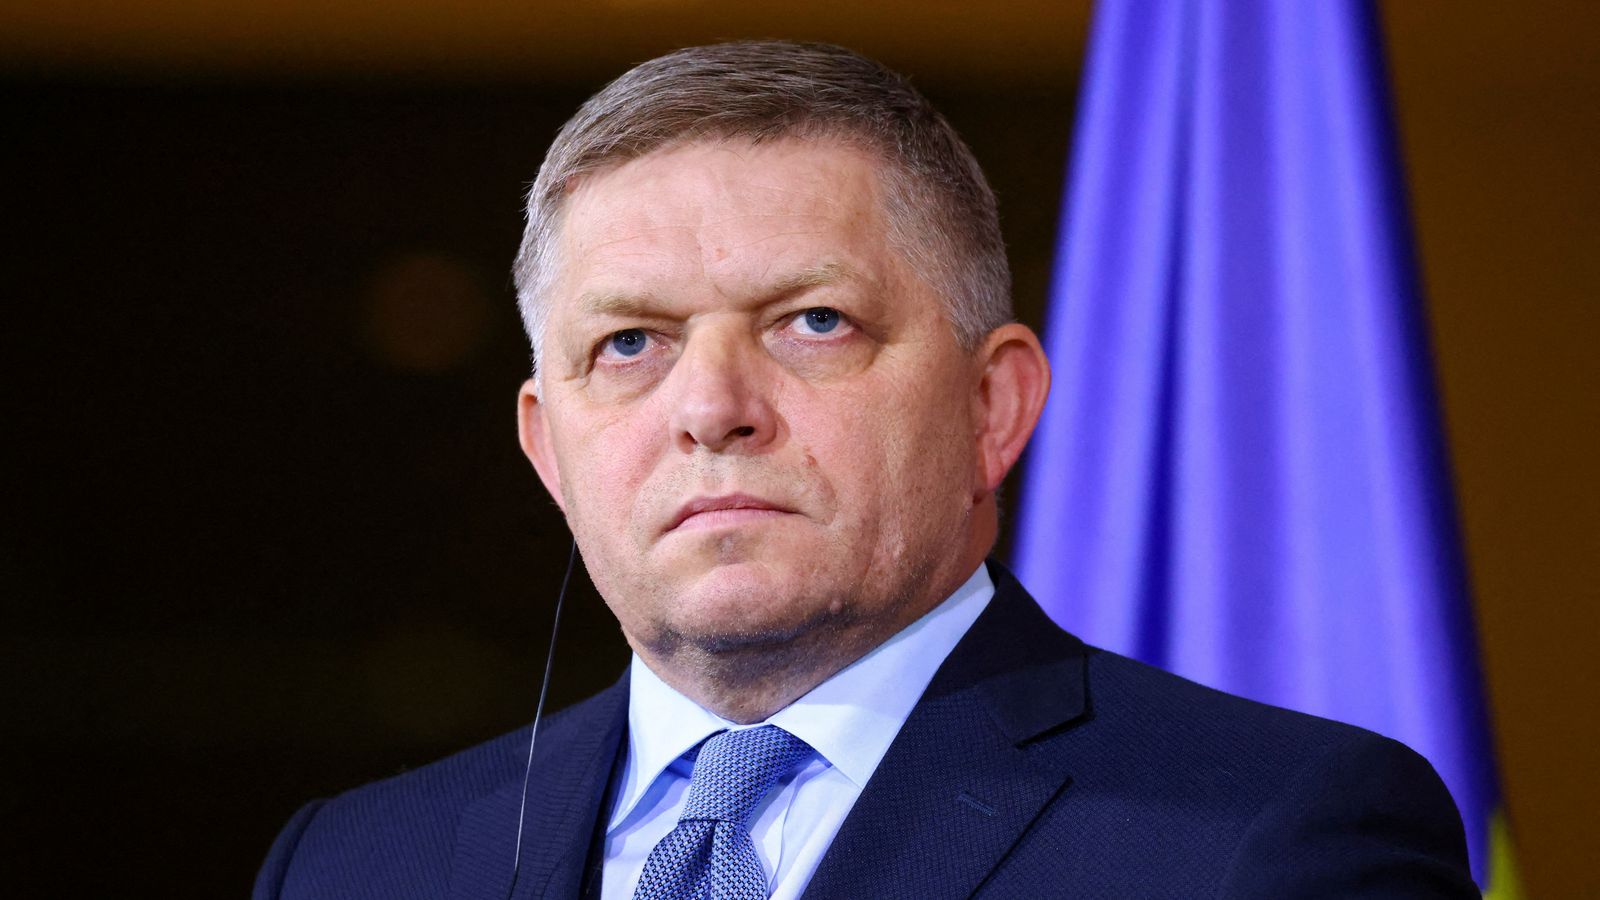 Who is Slovak PM Robert Fico?